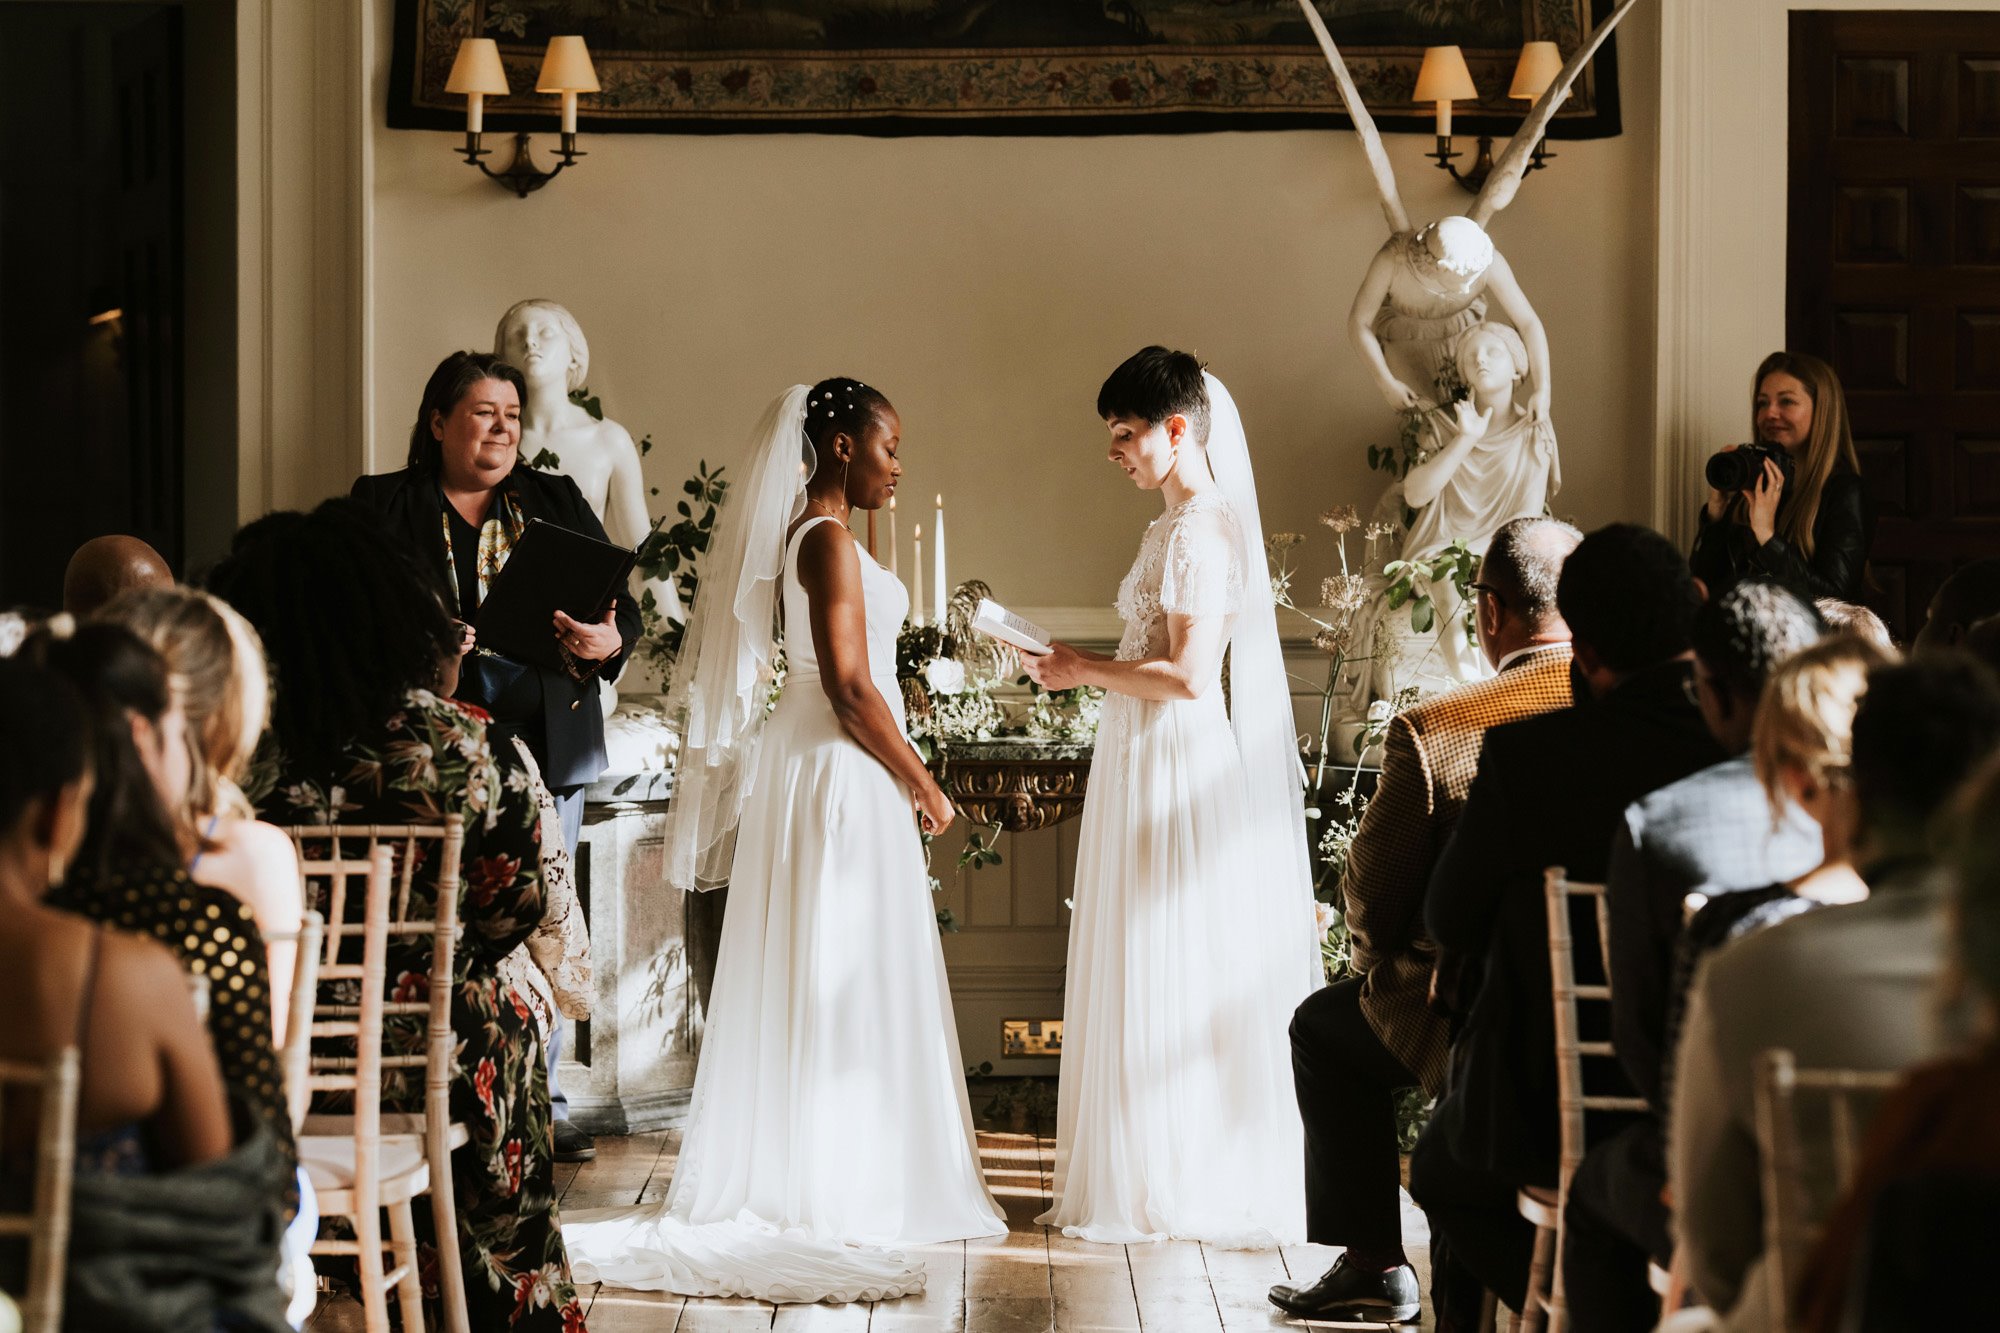 Wedding ceremony in a stately home with two brides standing facing each other reading vows